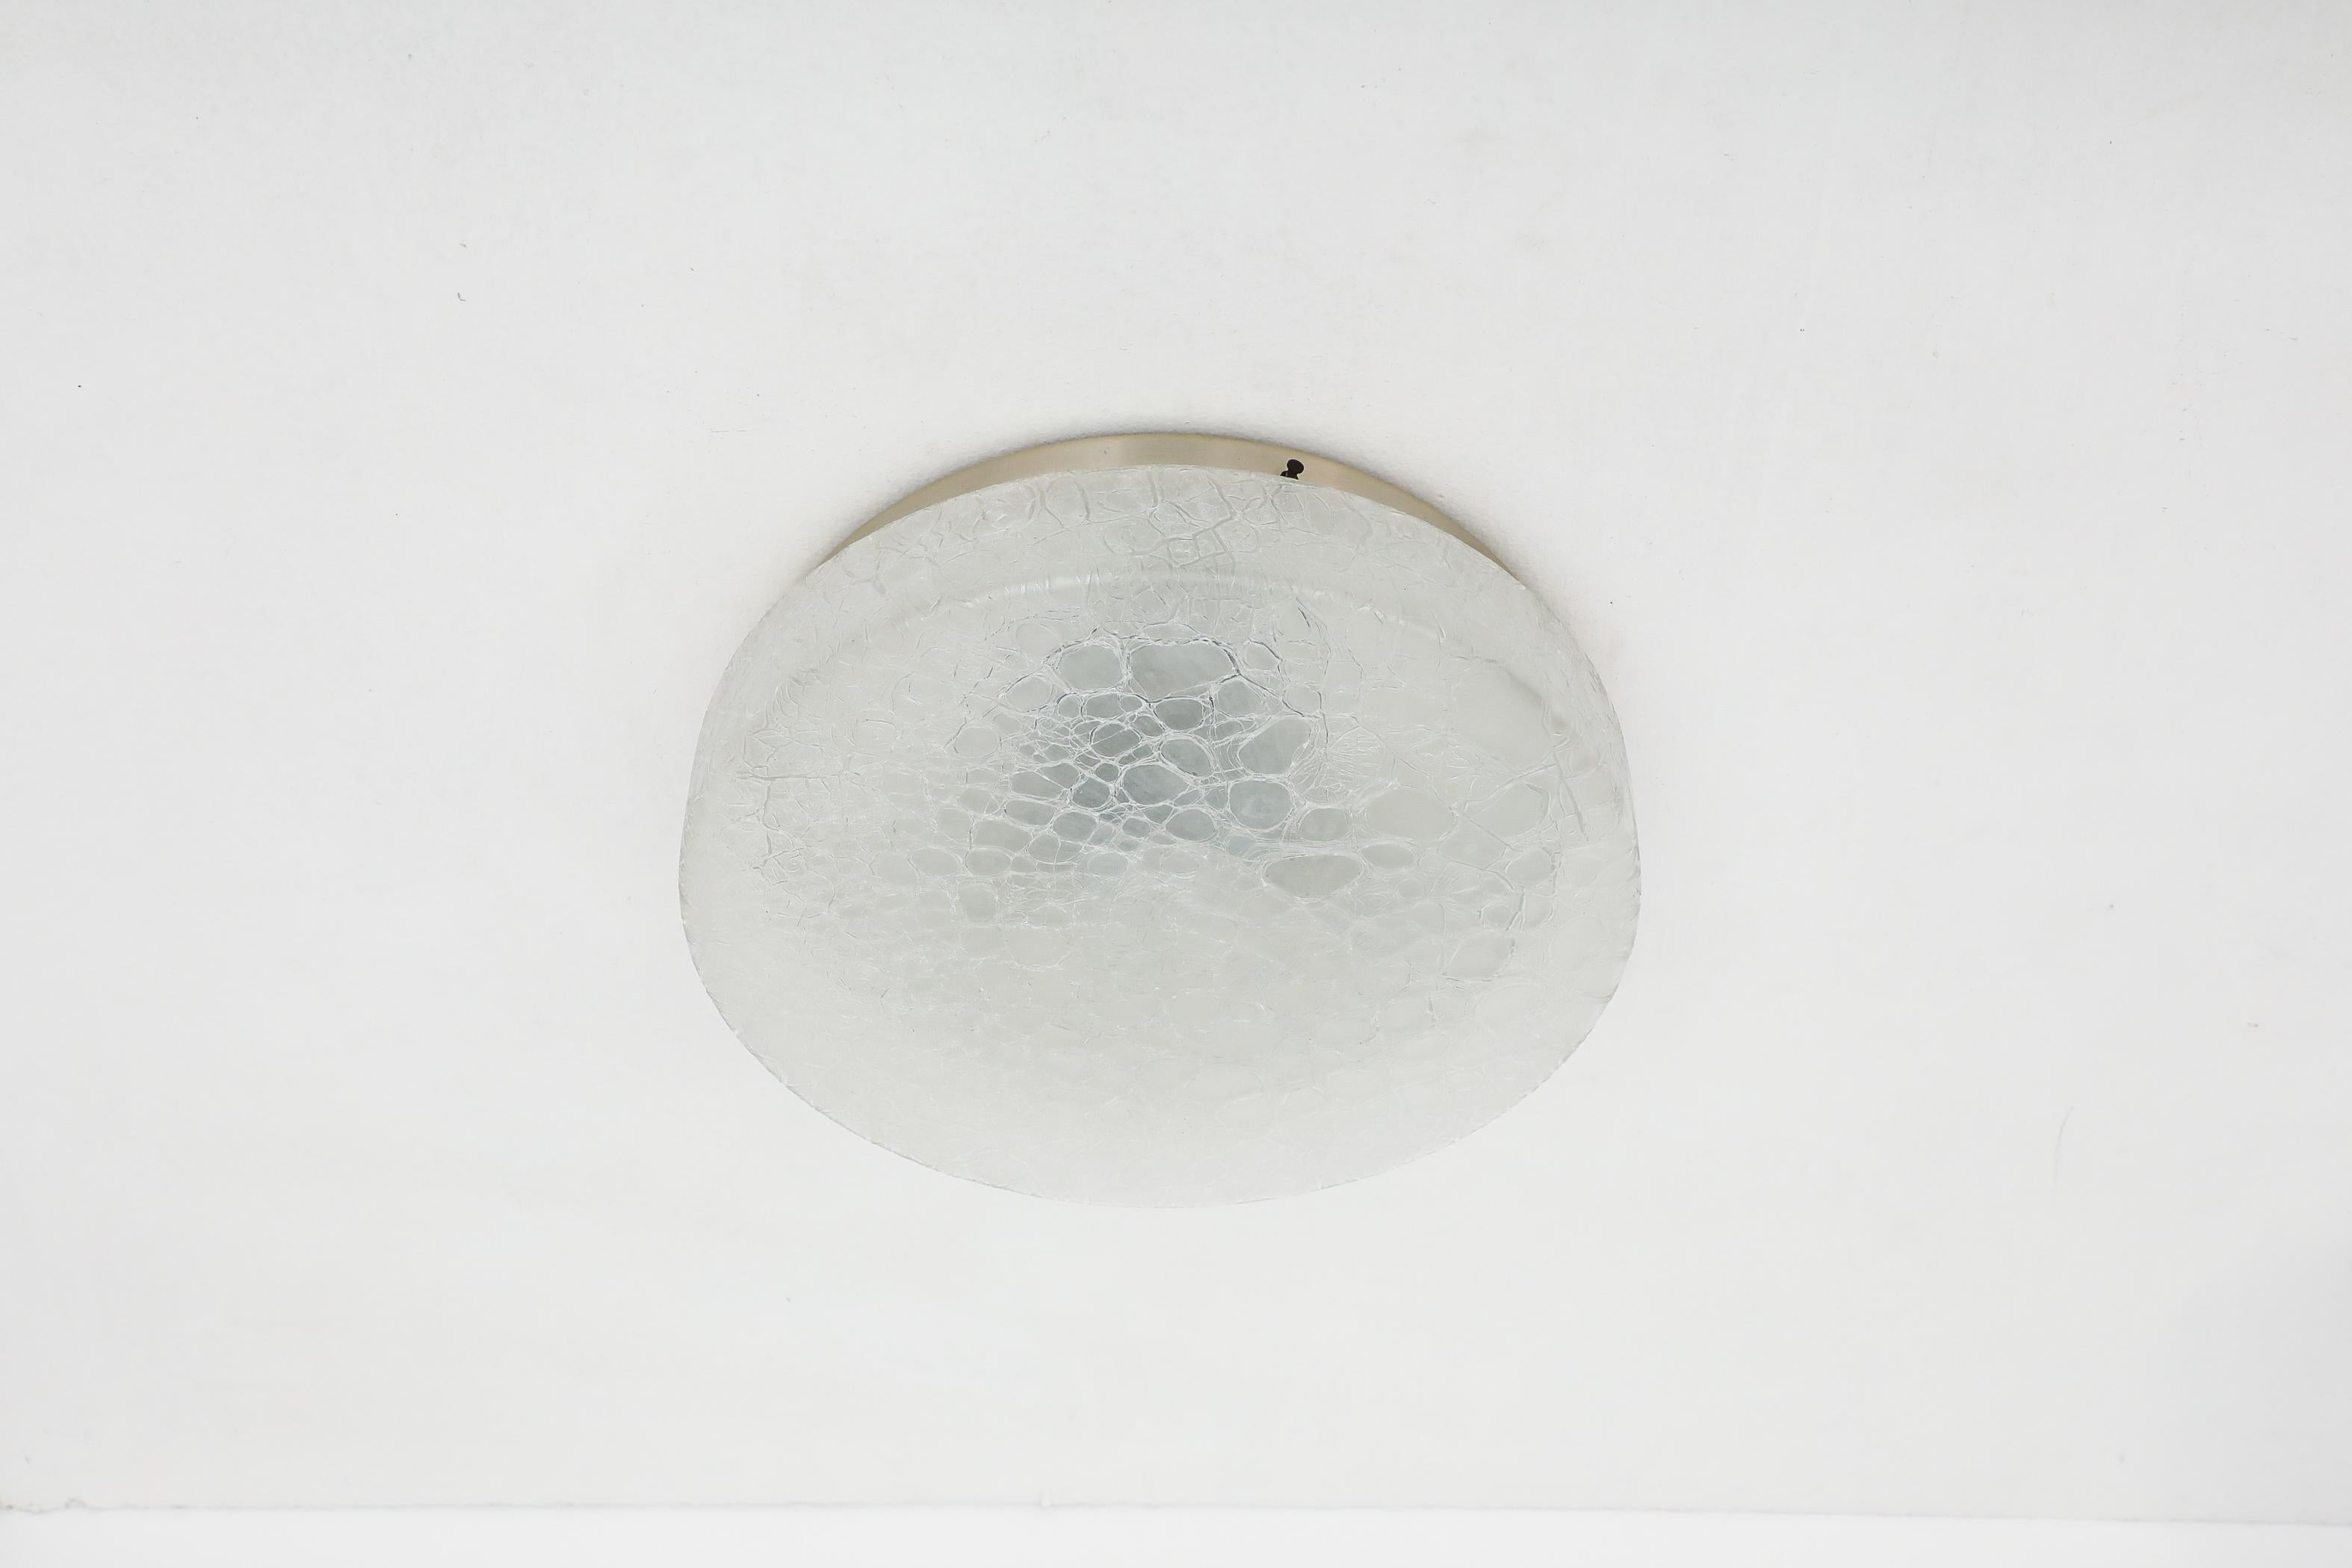 Mid-Century round flush mount textured glass sconce ceiling light by Doria Leuchten with light gold toned base. In original condition with visible wear consistent with its age and use. This lamp is hardwired and takes 3a medium base E26/E27 bulbs,